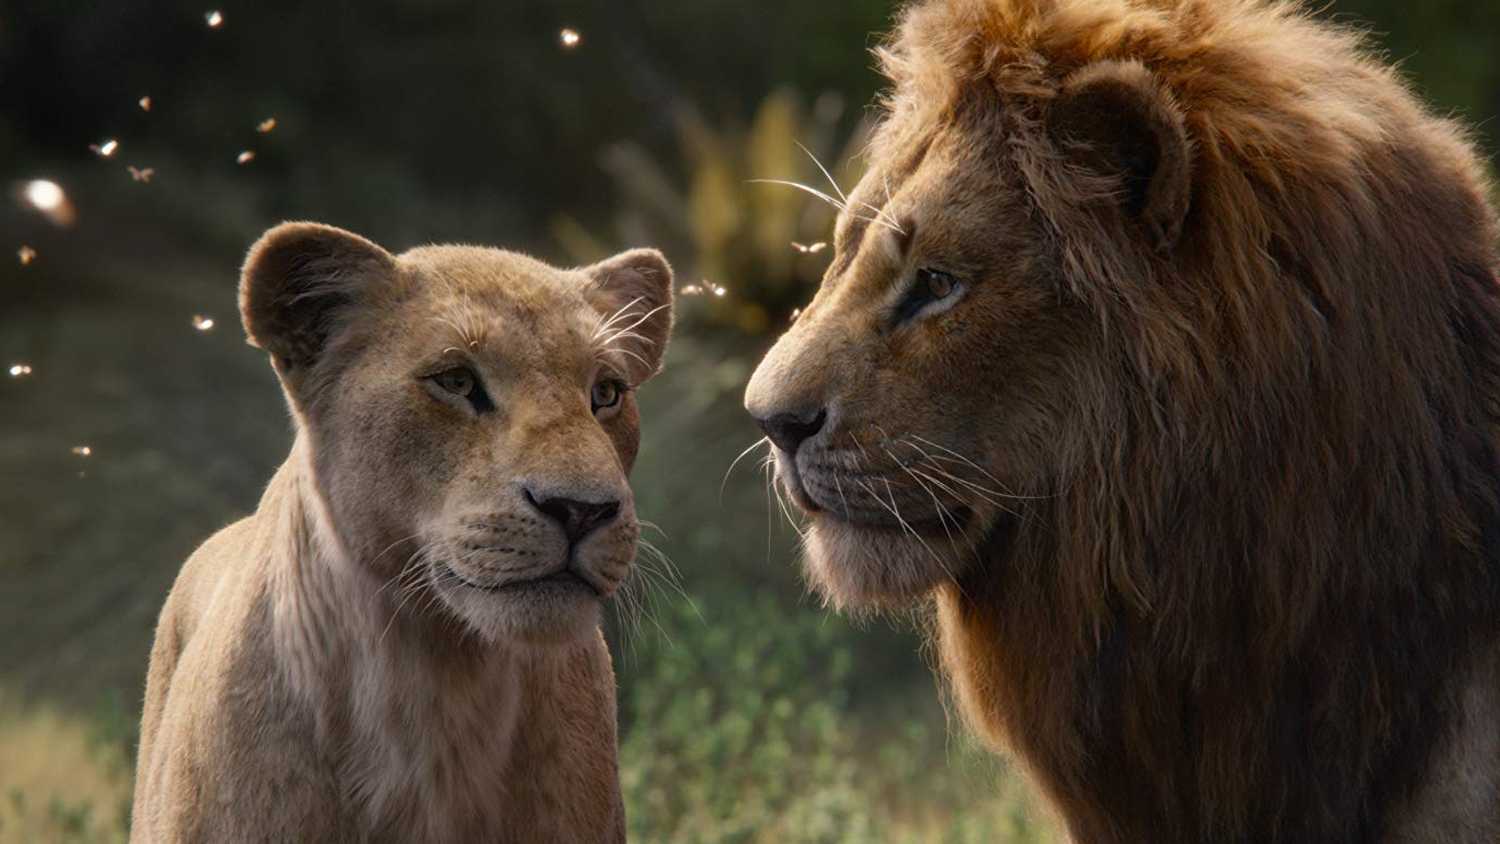 Lion King 2019: Lies take away the position of the lioness - Beauty Magazine